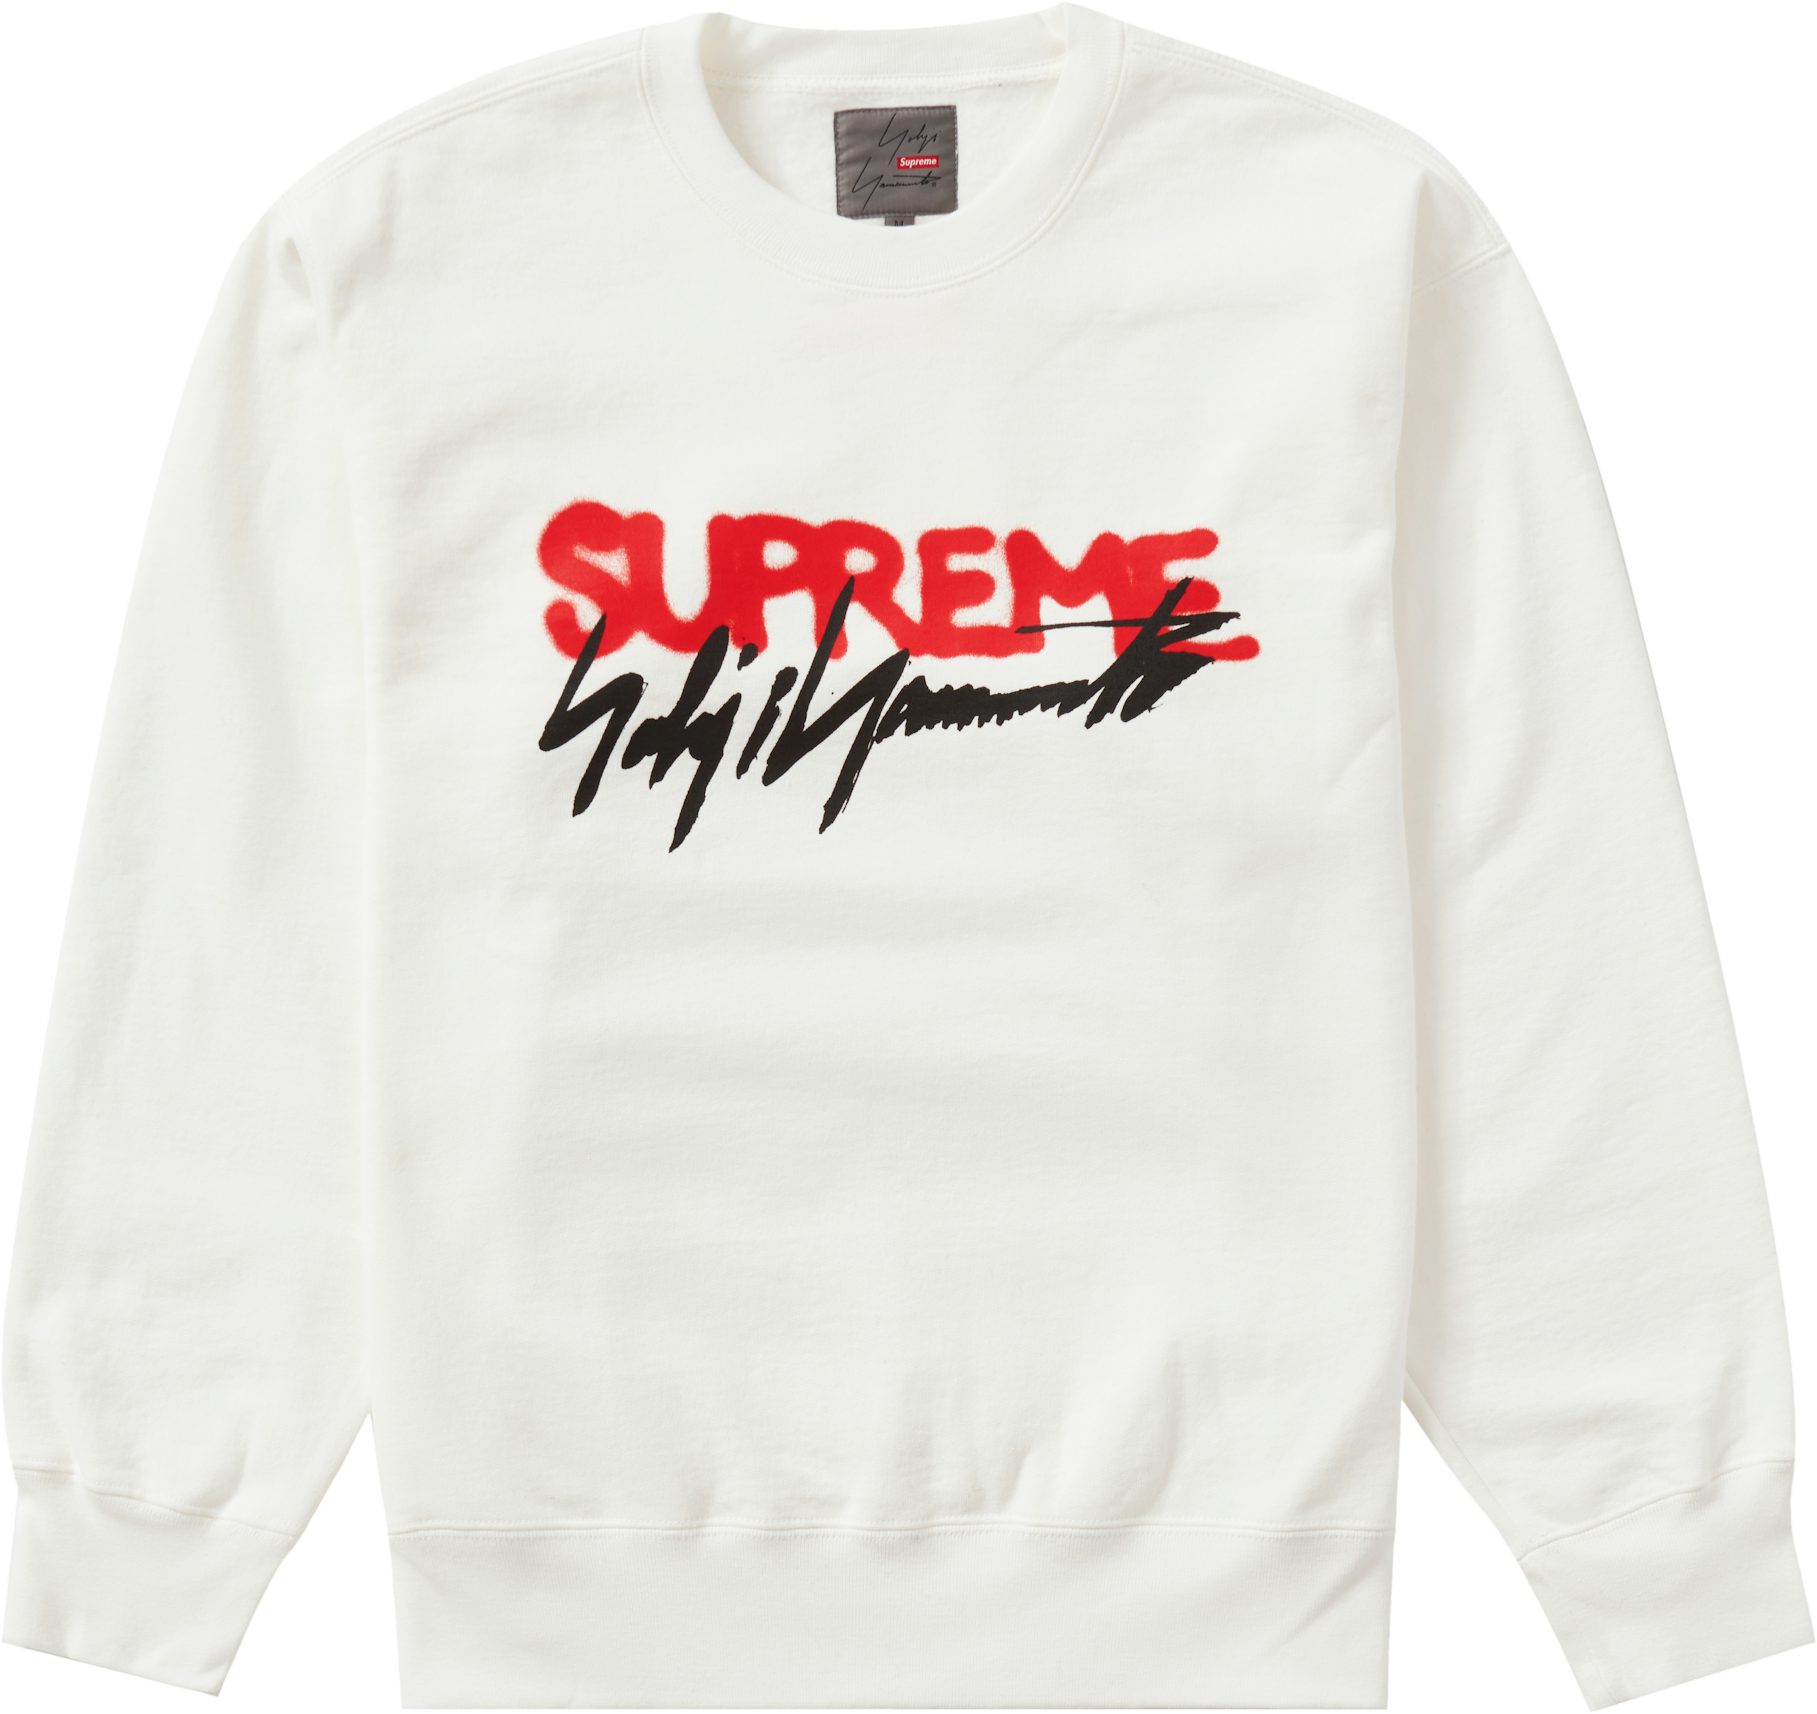 The Best Supreme Clothing Pieces From Fall/Winter 2017 - StockX News